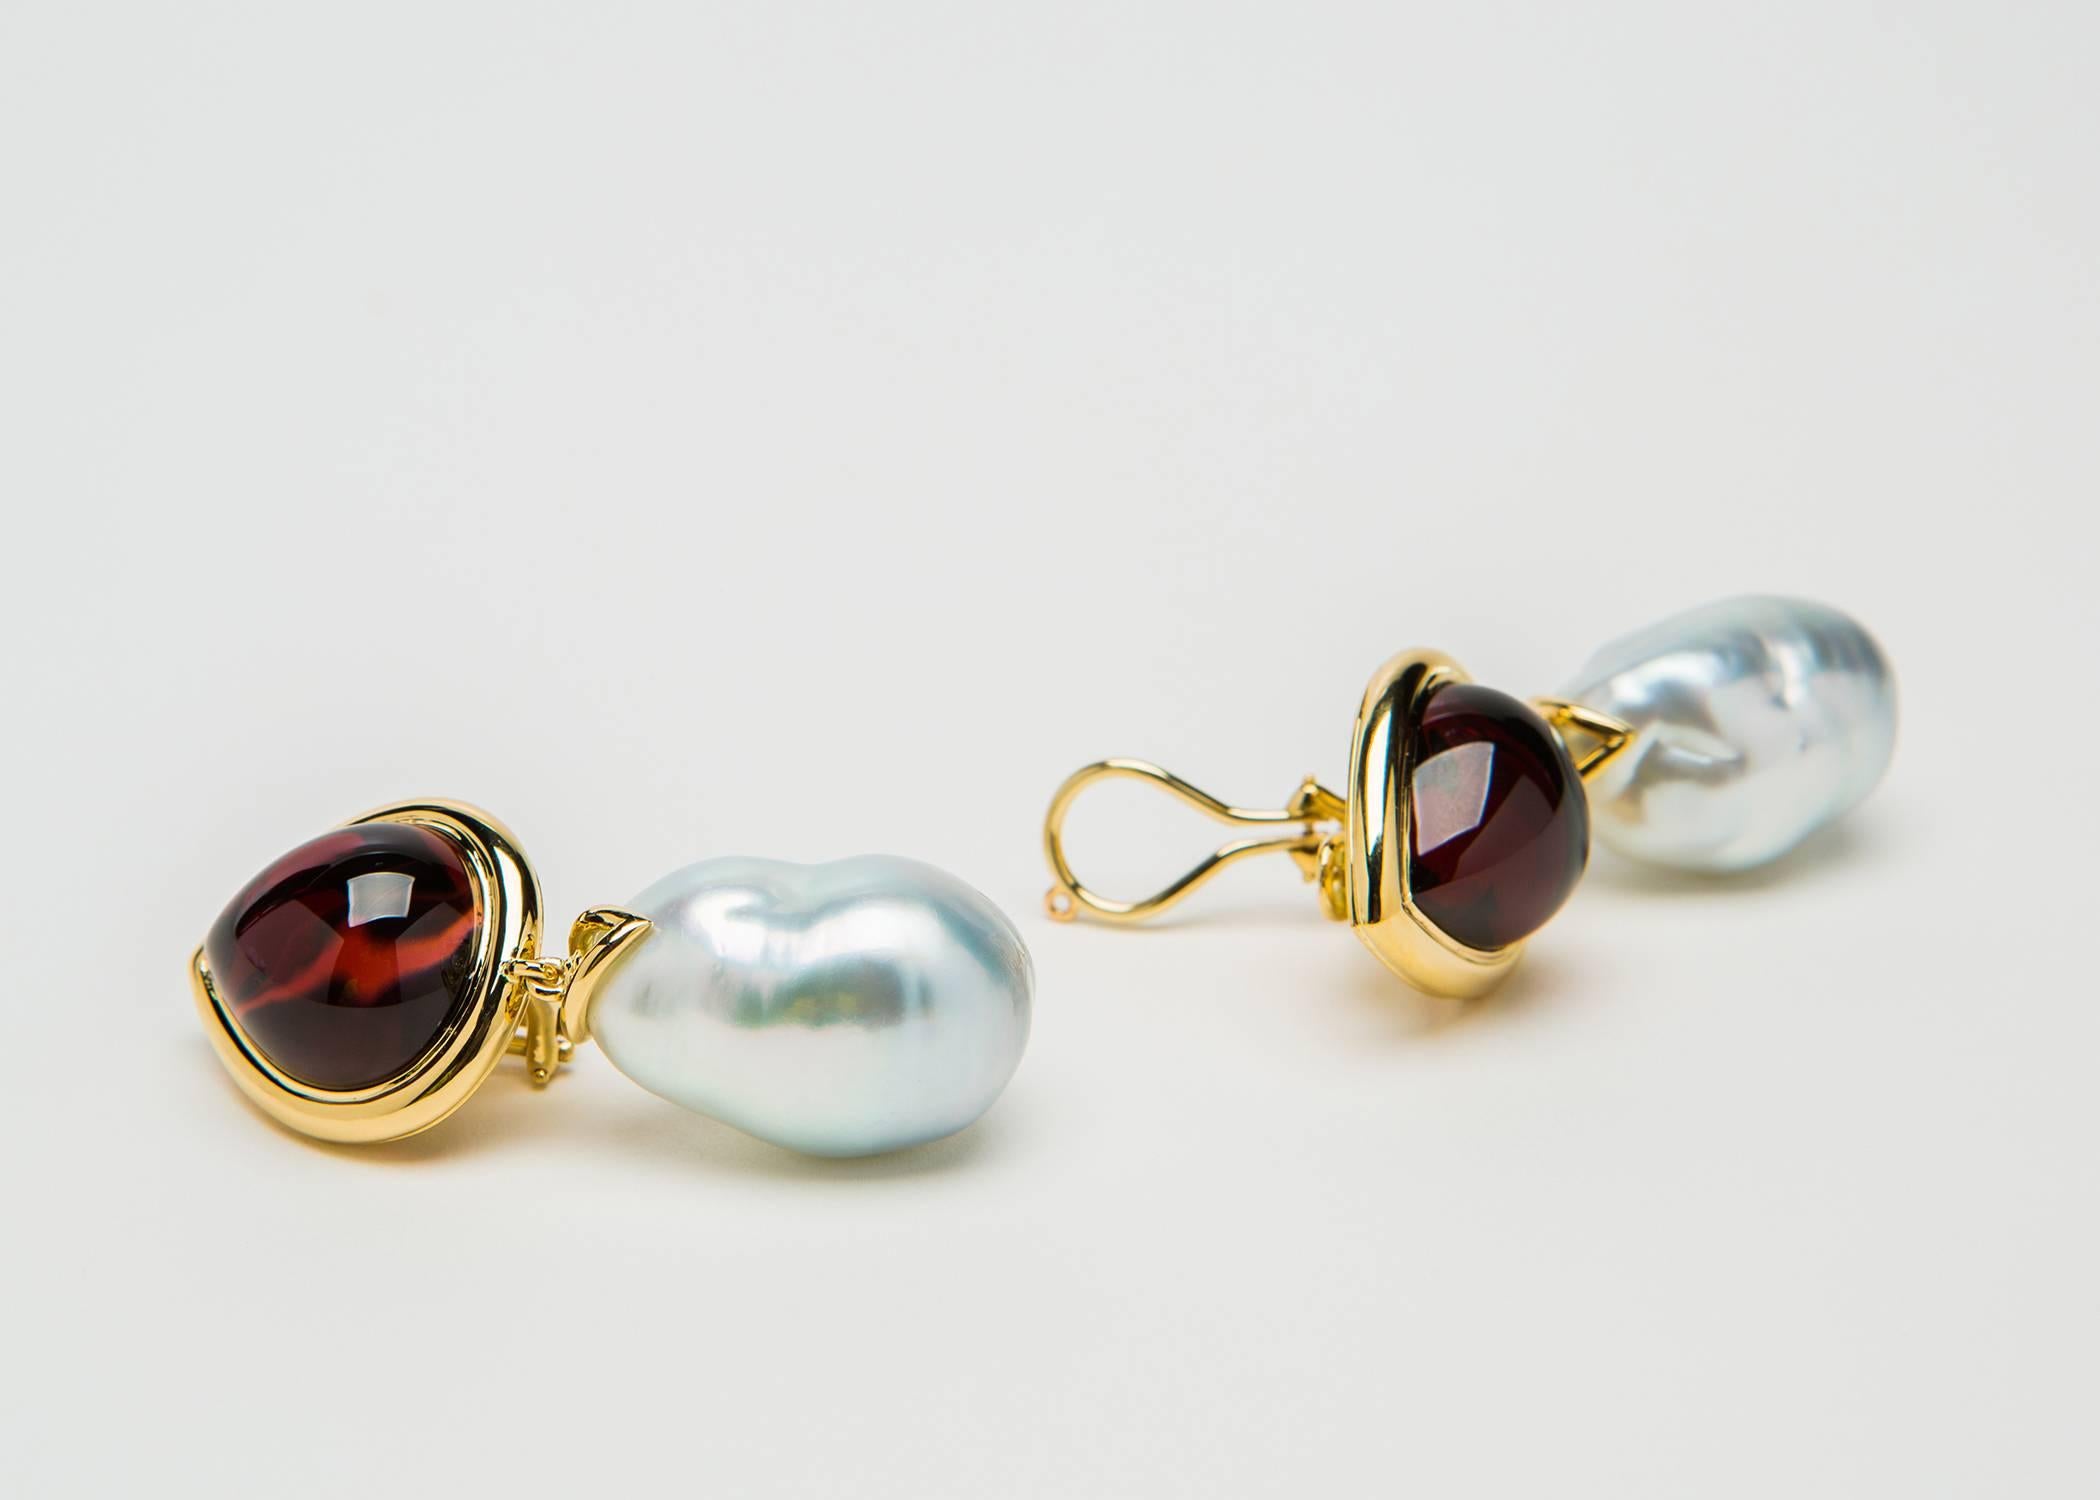 The importance of this pair of earrings is not just the the rare size but the extraordinary quality of these gemstones. The deep richness of this pair of cabochon garnets is brought out by exceptional German cutting. Each stone is 20 carats in